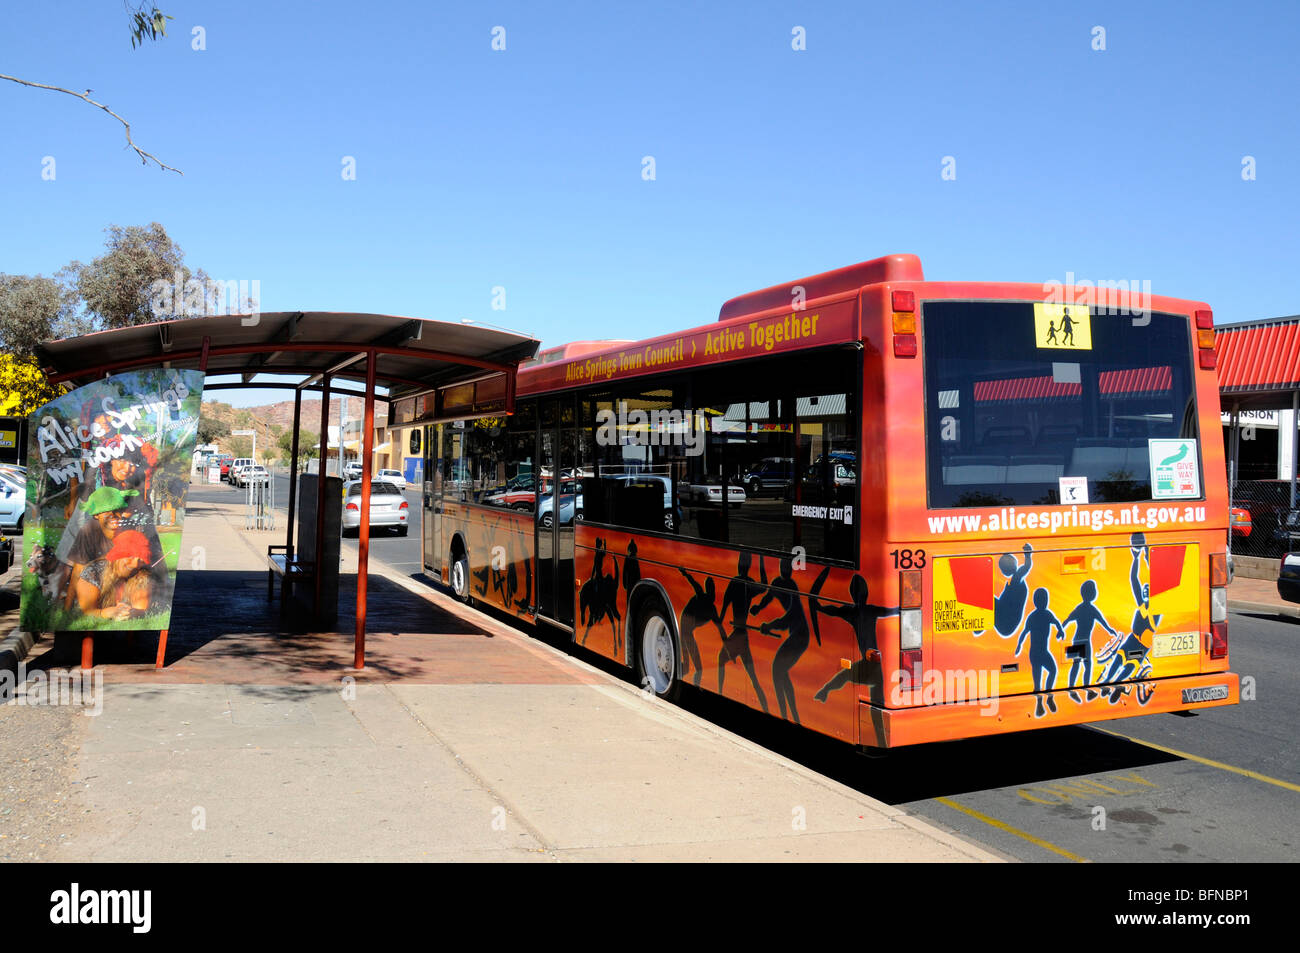 A public transport bus painted in Aboriginal art parked at a bus stop at Alice Springs, Australia Stock Photo